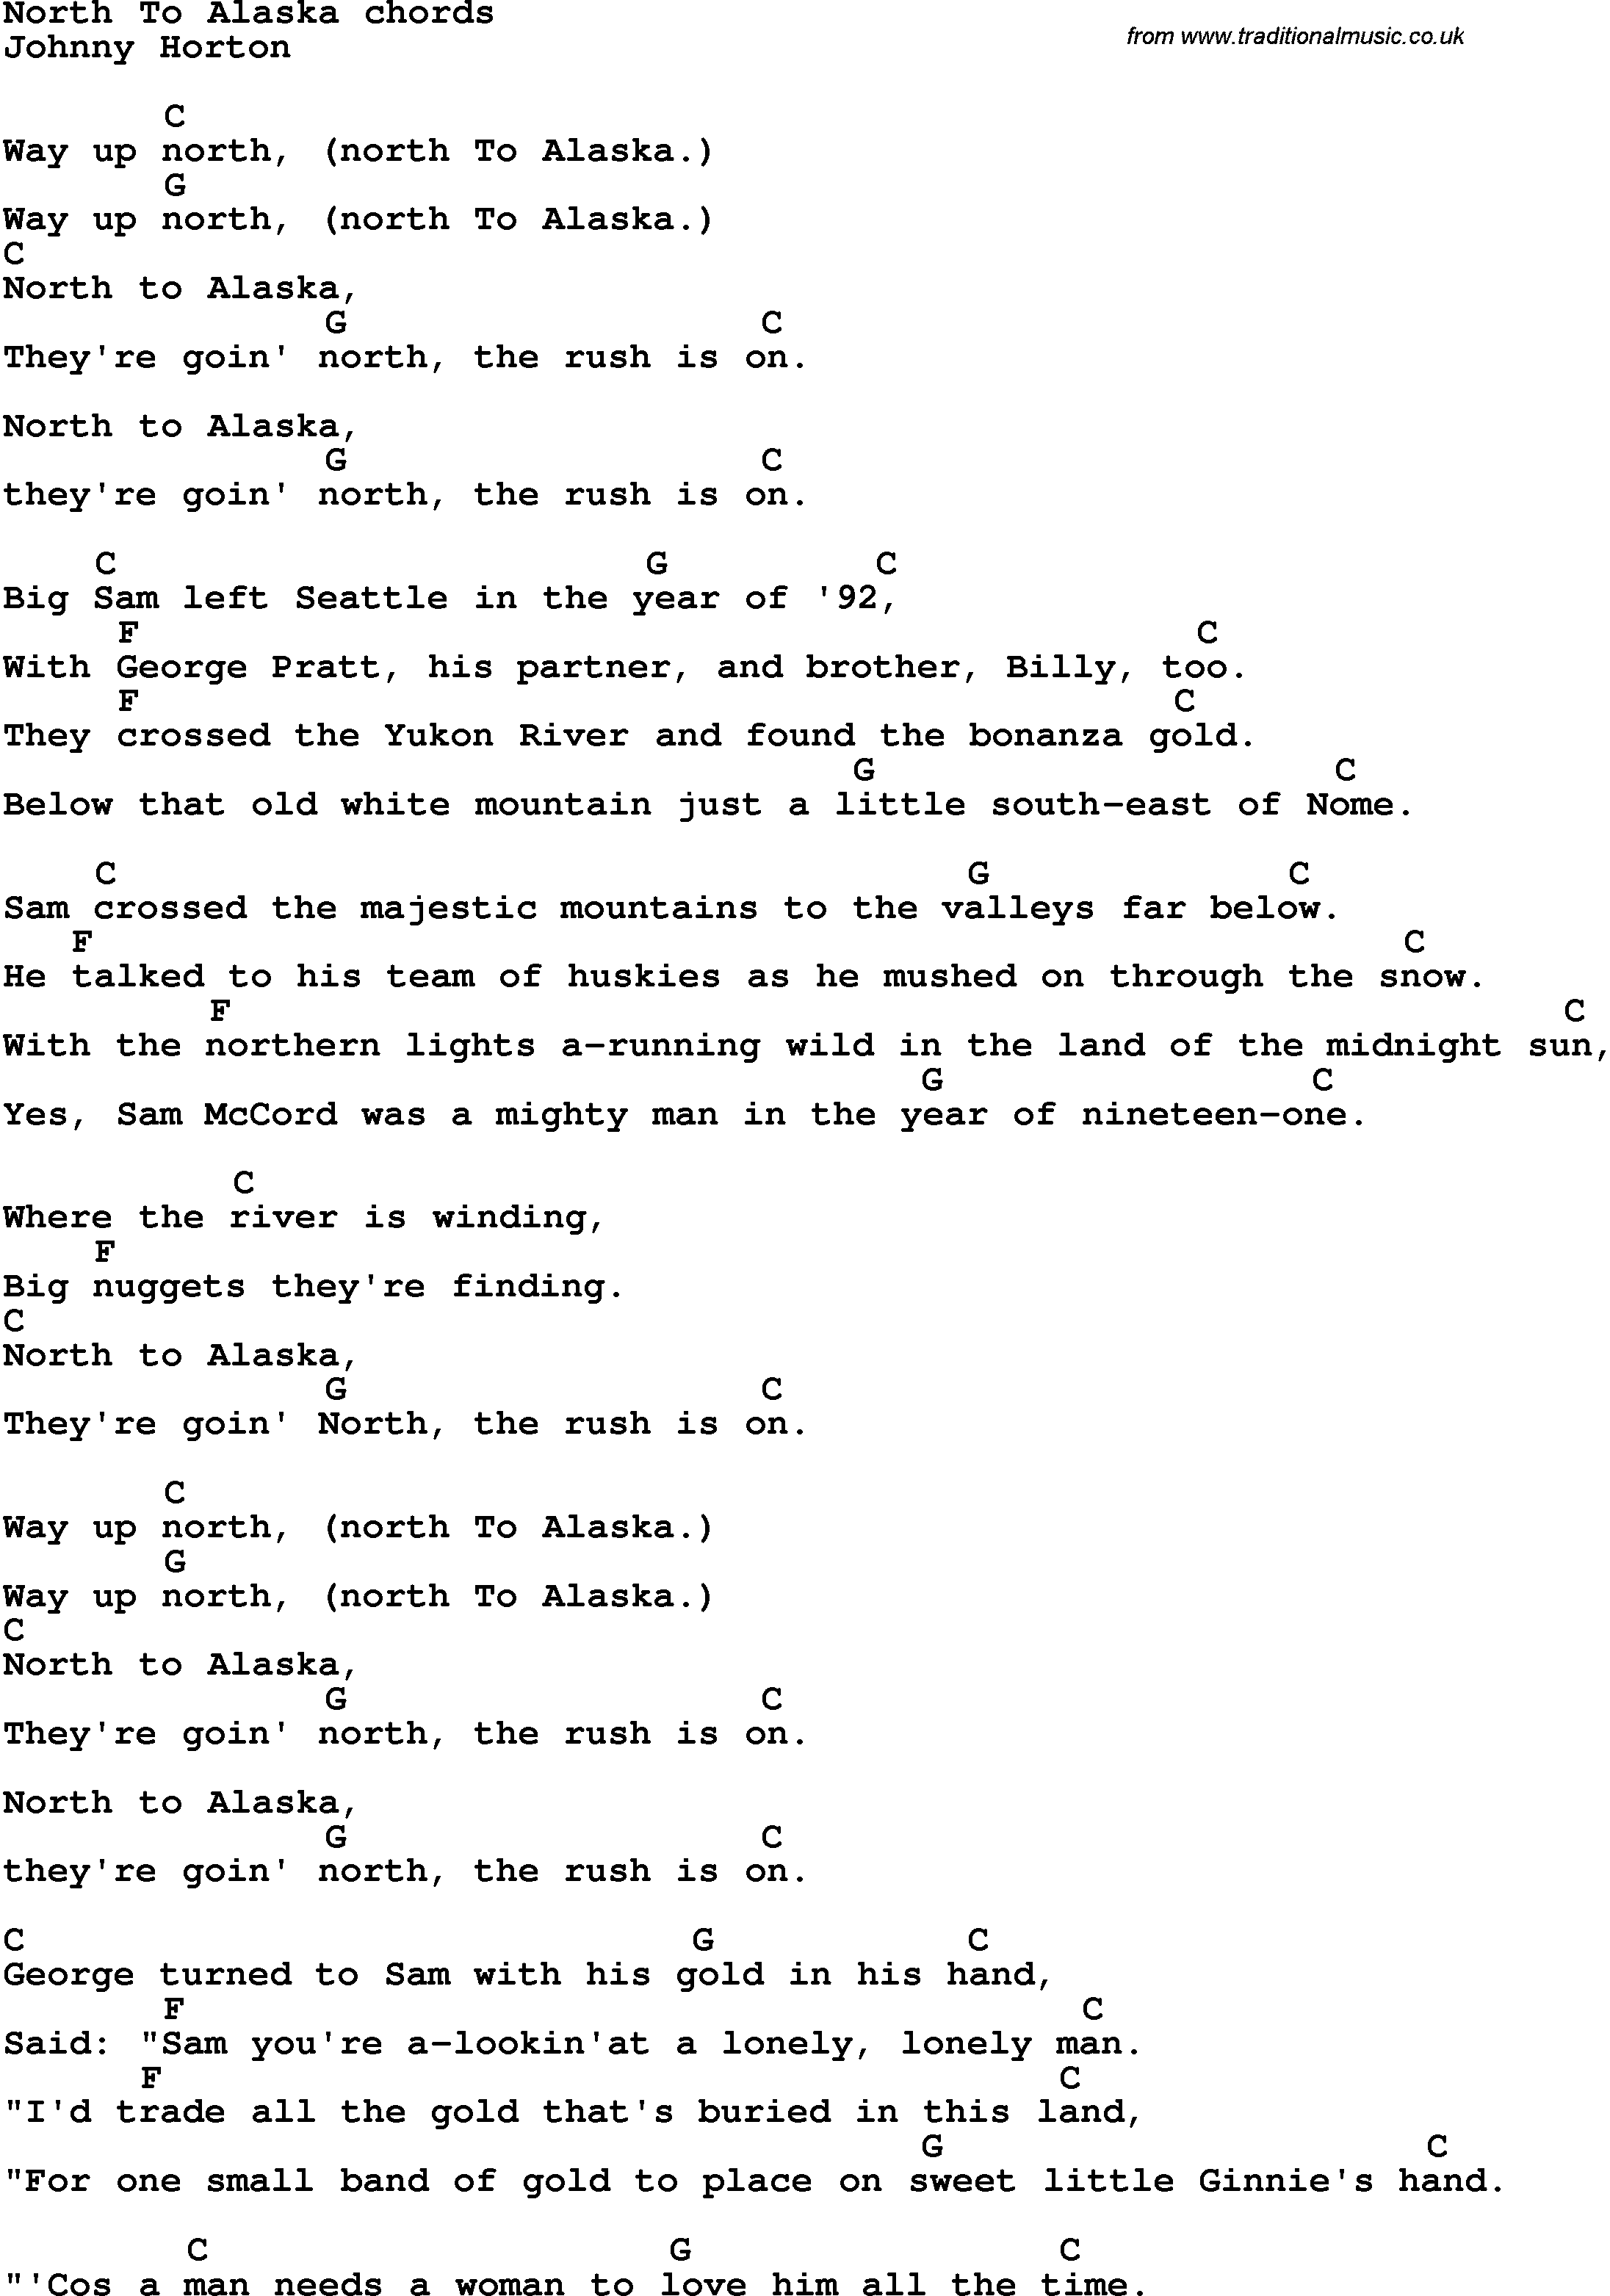 Song Lyrics with guitar chords for North To Alaska